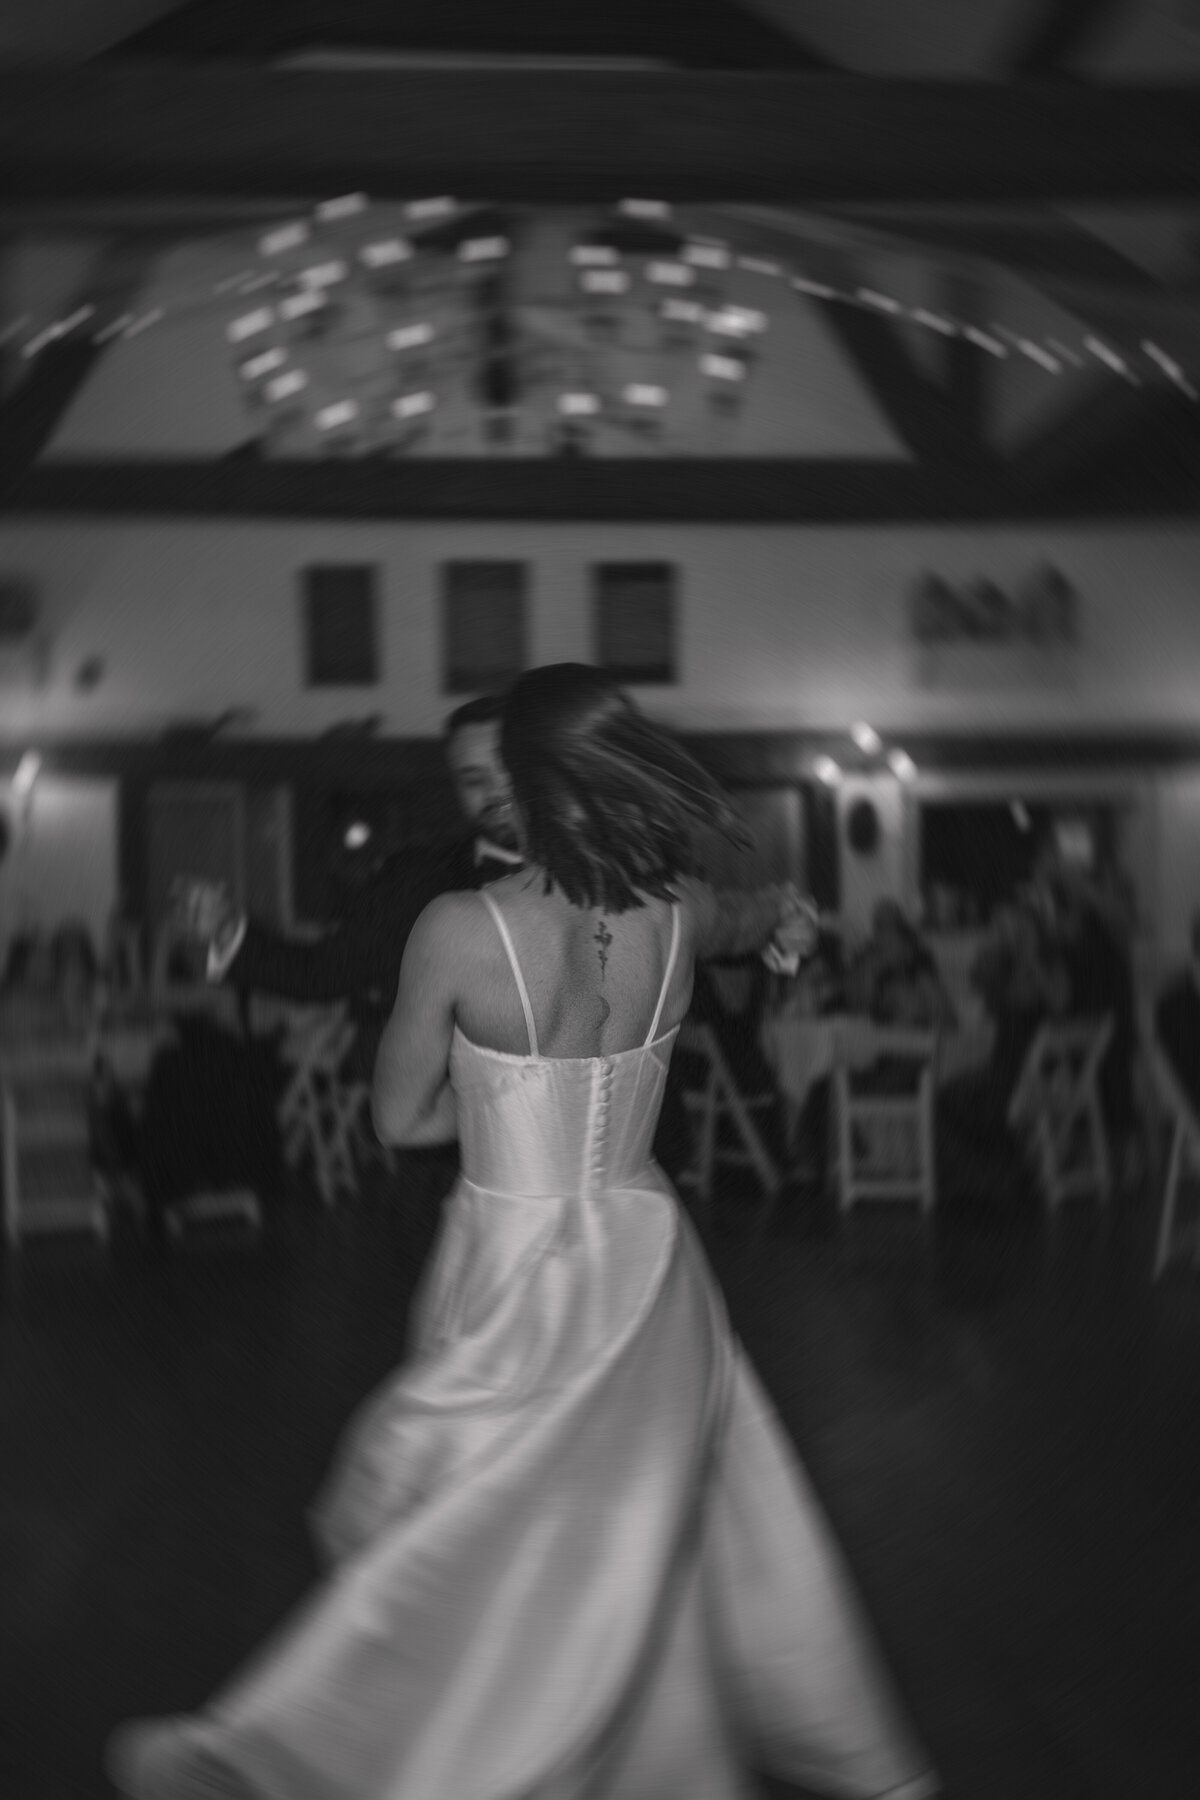 Bride and groom share a dynamic dance at their wedding reception, captured in a blurred motion that emphasizes the movement and energy. The bride's back tattoo is visible as her satin gown flows around her, while the groom holds her hand, both immersed in the joyous moment.